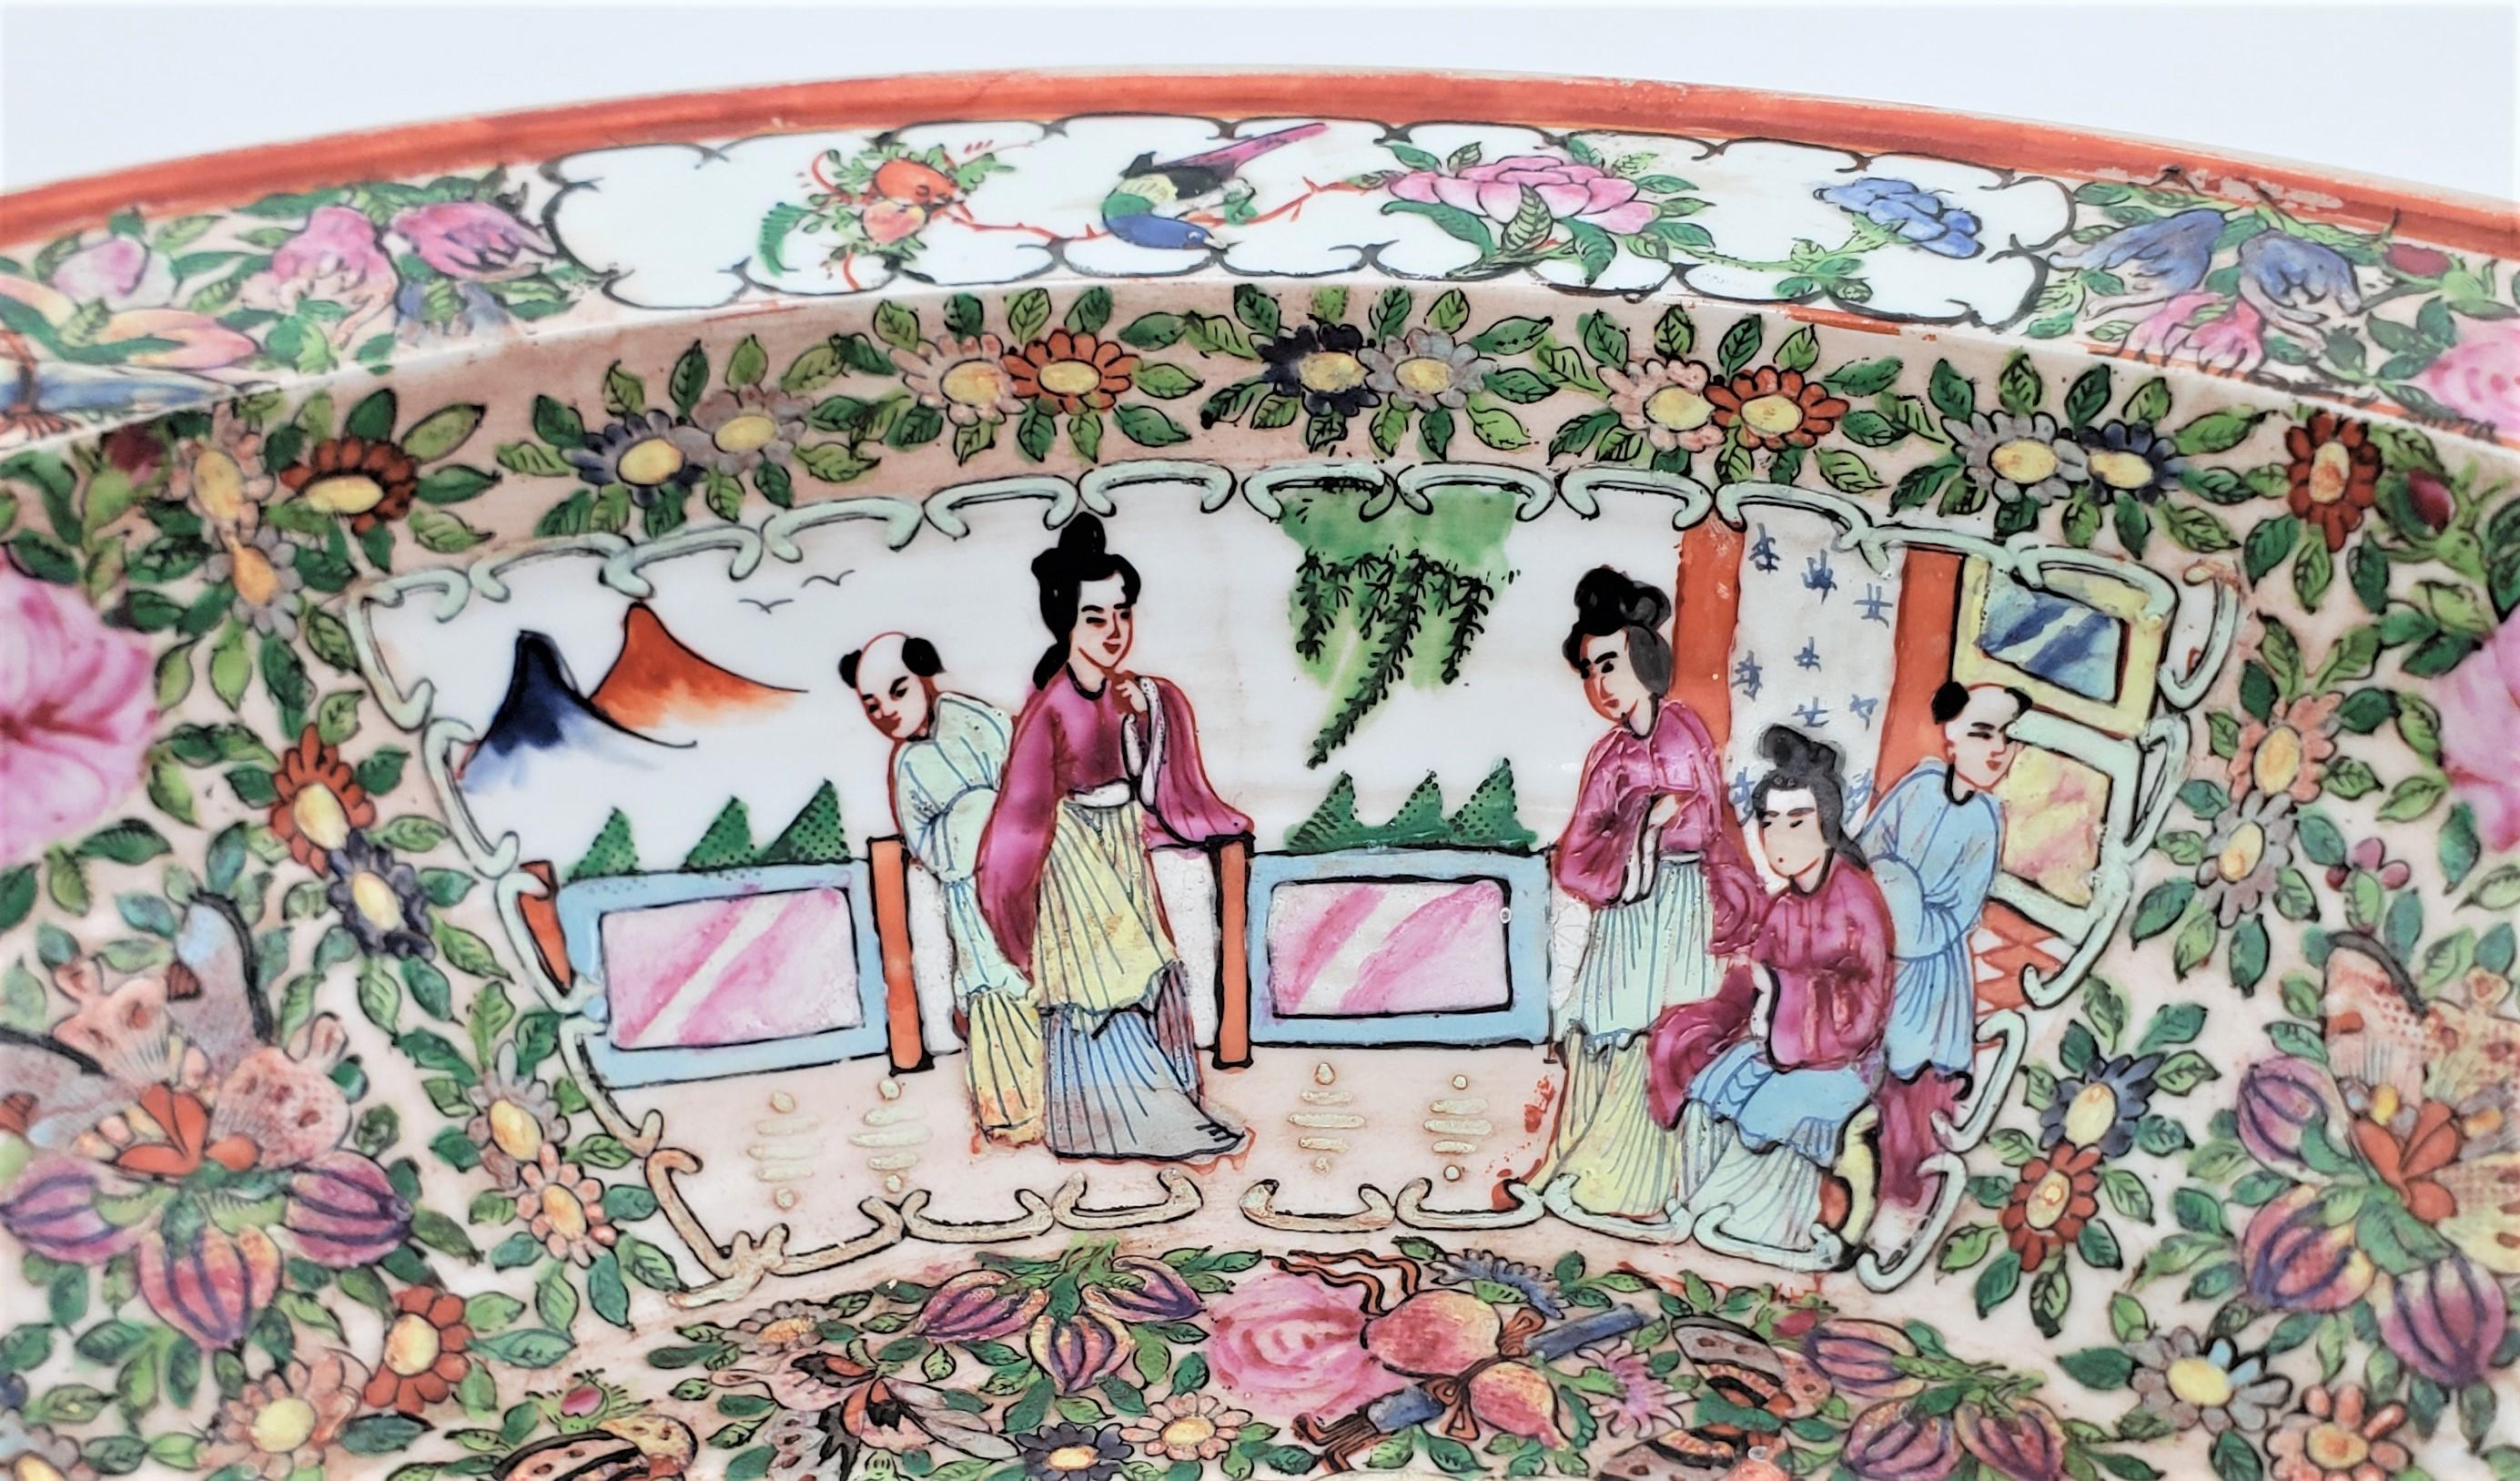 Hand-Crafted Large Antique Qing Dynasty Famille Rose Elaborately Hand-Painted Bowl or Basin For Sale